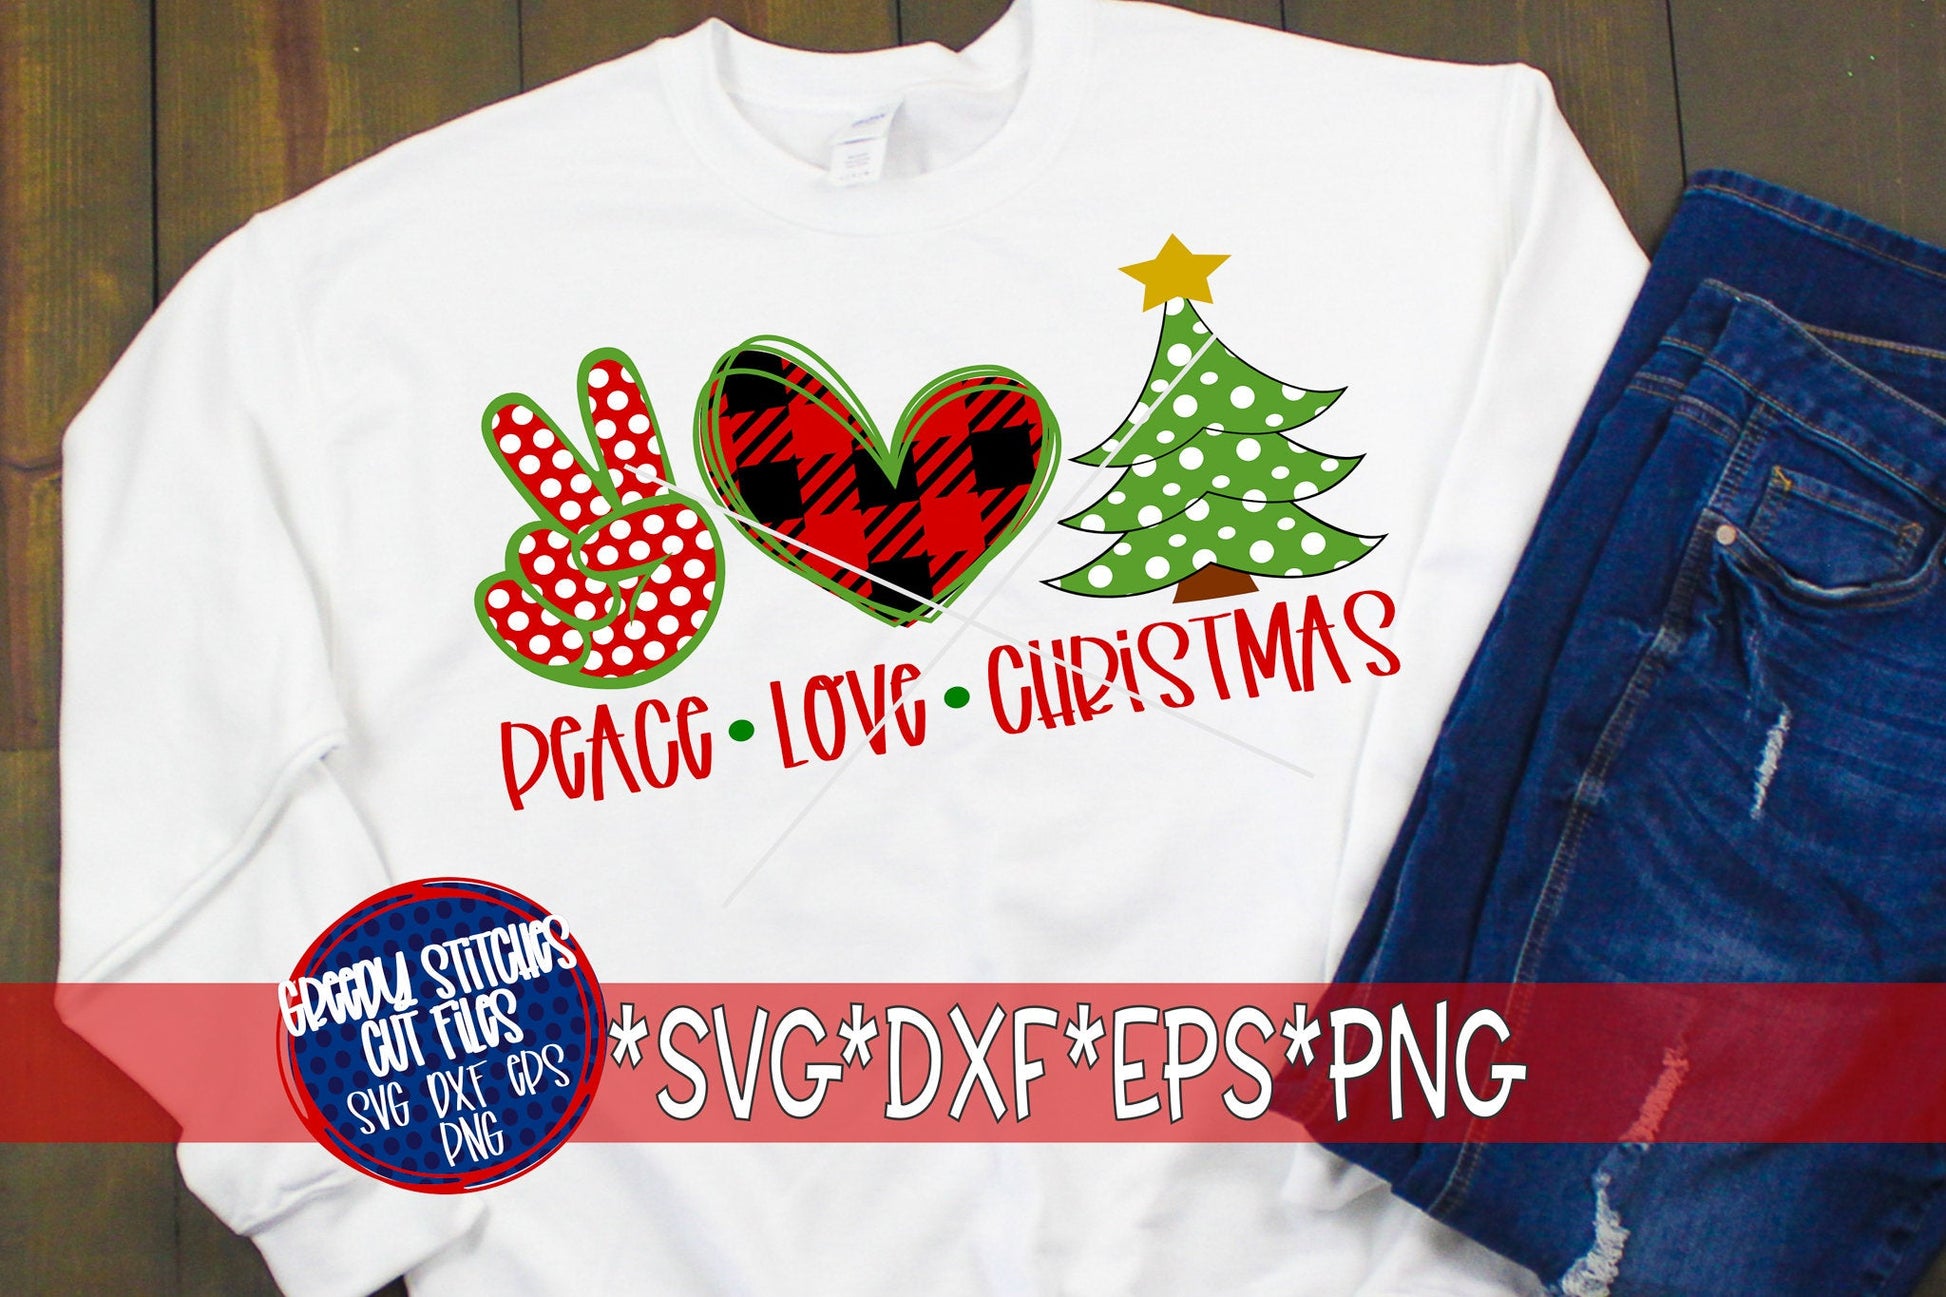 Peace Love Christmas svg dxf eps png. Christmas SvG | Buffalo Plaid SvG | Tree SvG | Christmas DxF |Peace DxF | Instant Download Cut File